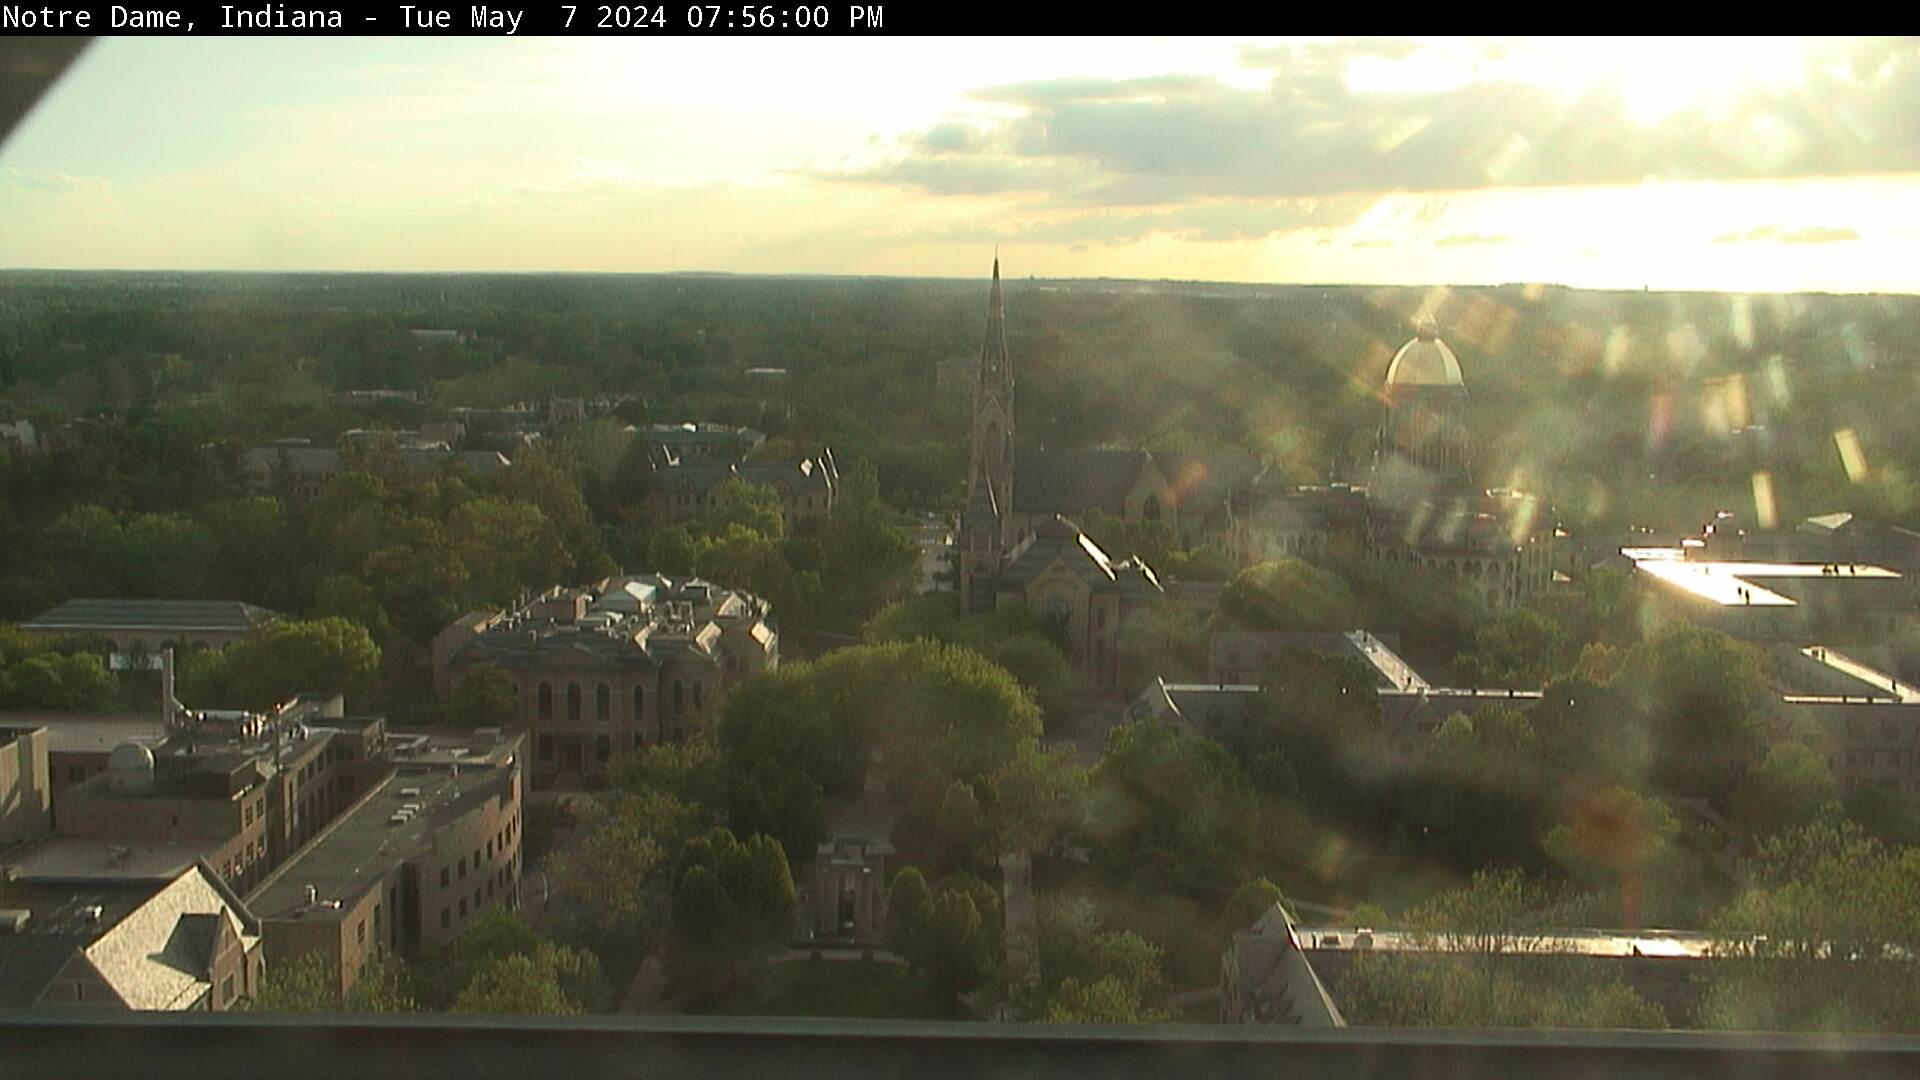 Notre Dame, Indiana Wed. 19:56